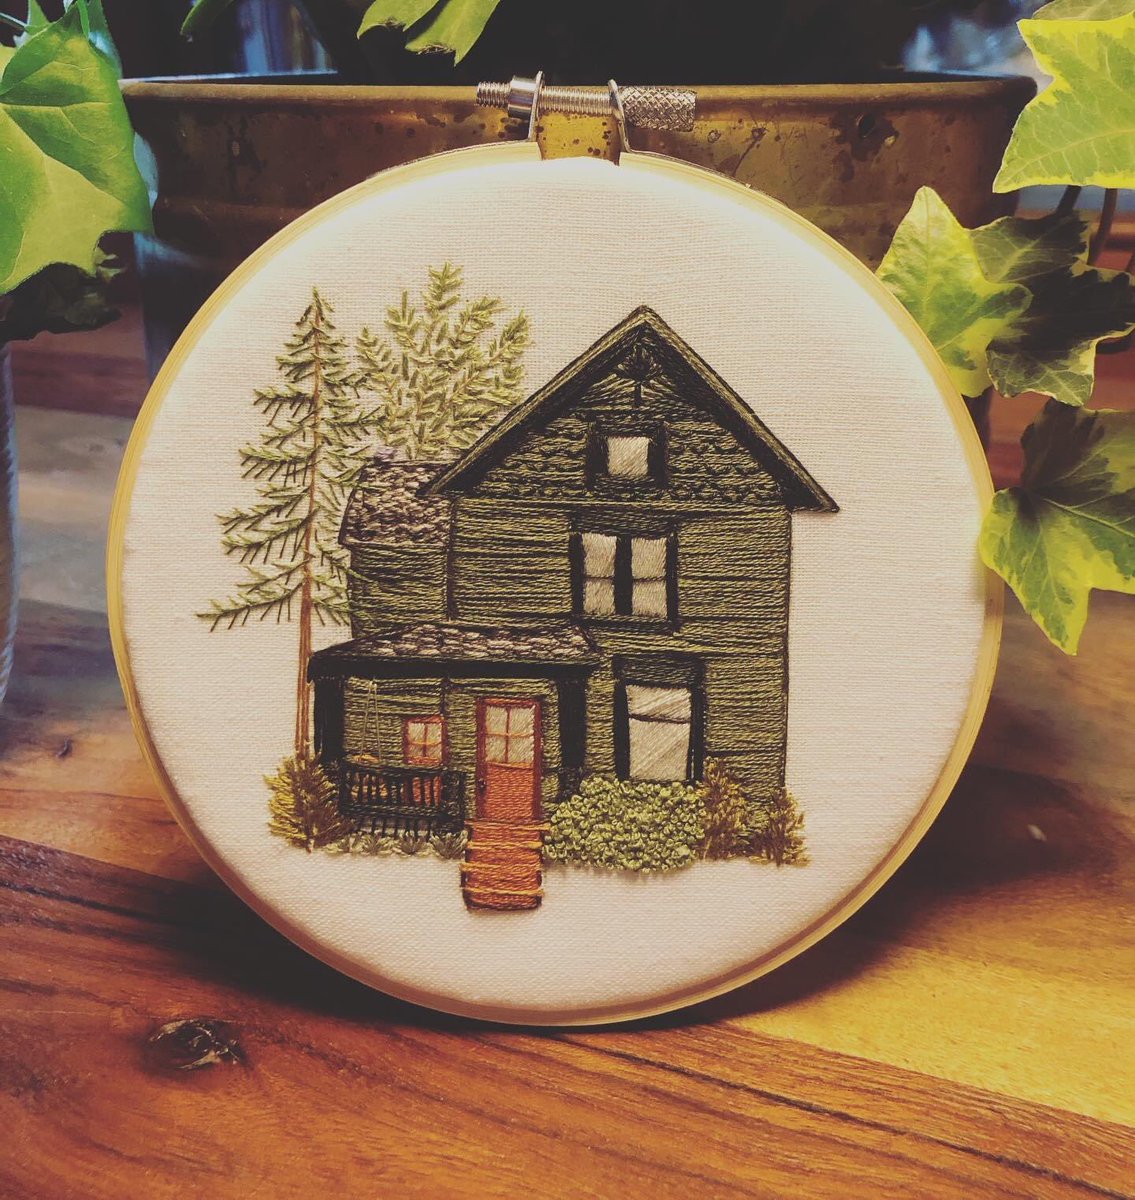 Loved doing this charming green house in London, Ontario for a custom ordered gift.                               #customembroidery #handstitched #handmade #ptbomakers #embroideryhoopart #embroidery #embroideryhoop #home #dmc